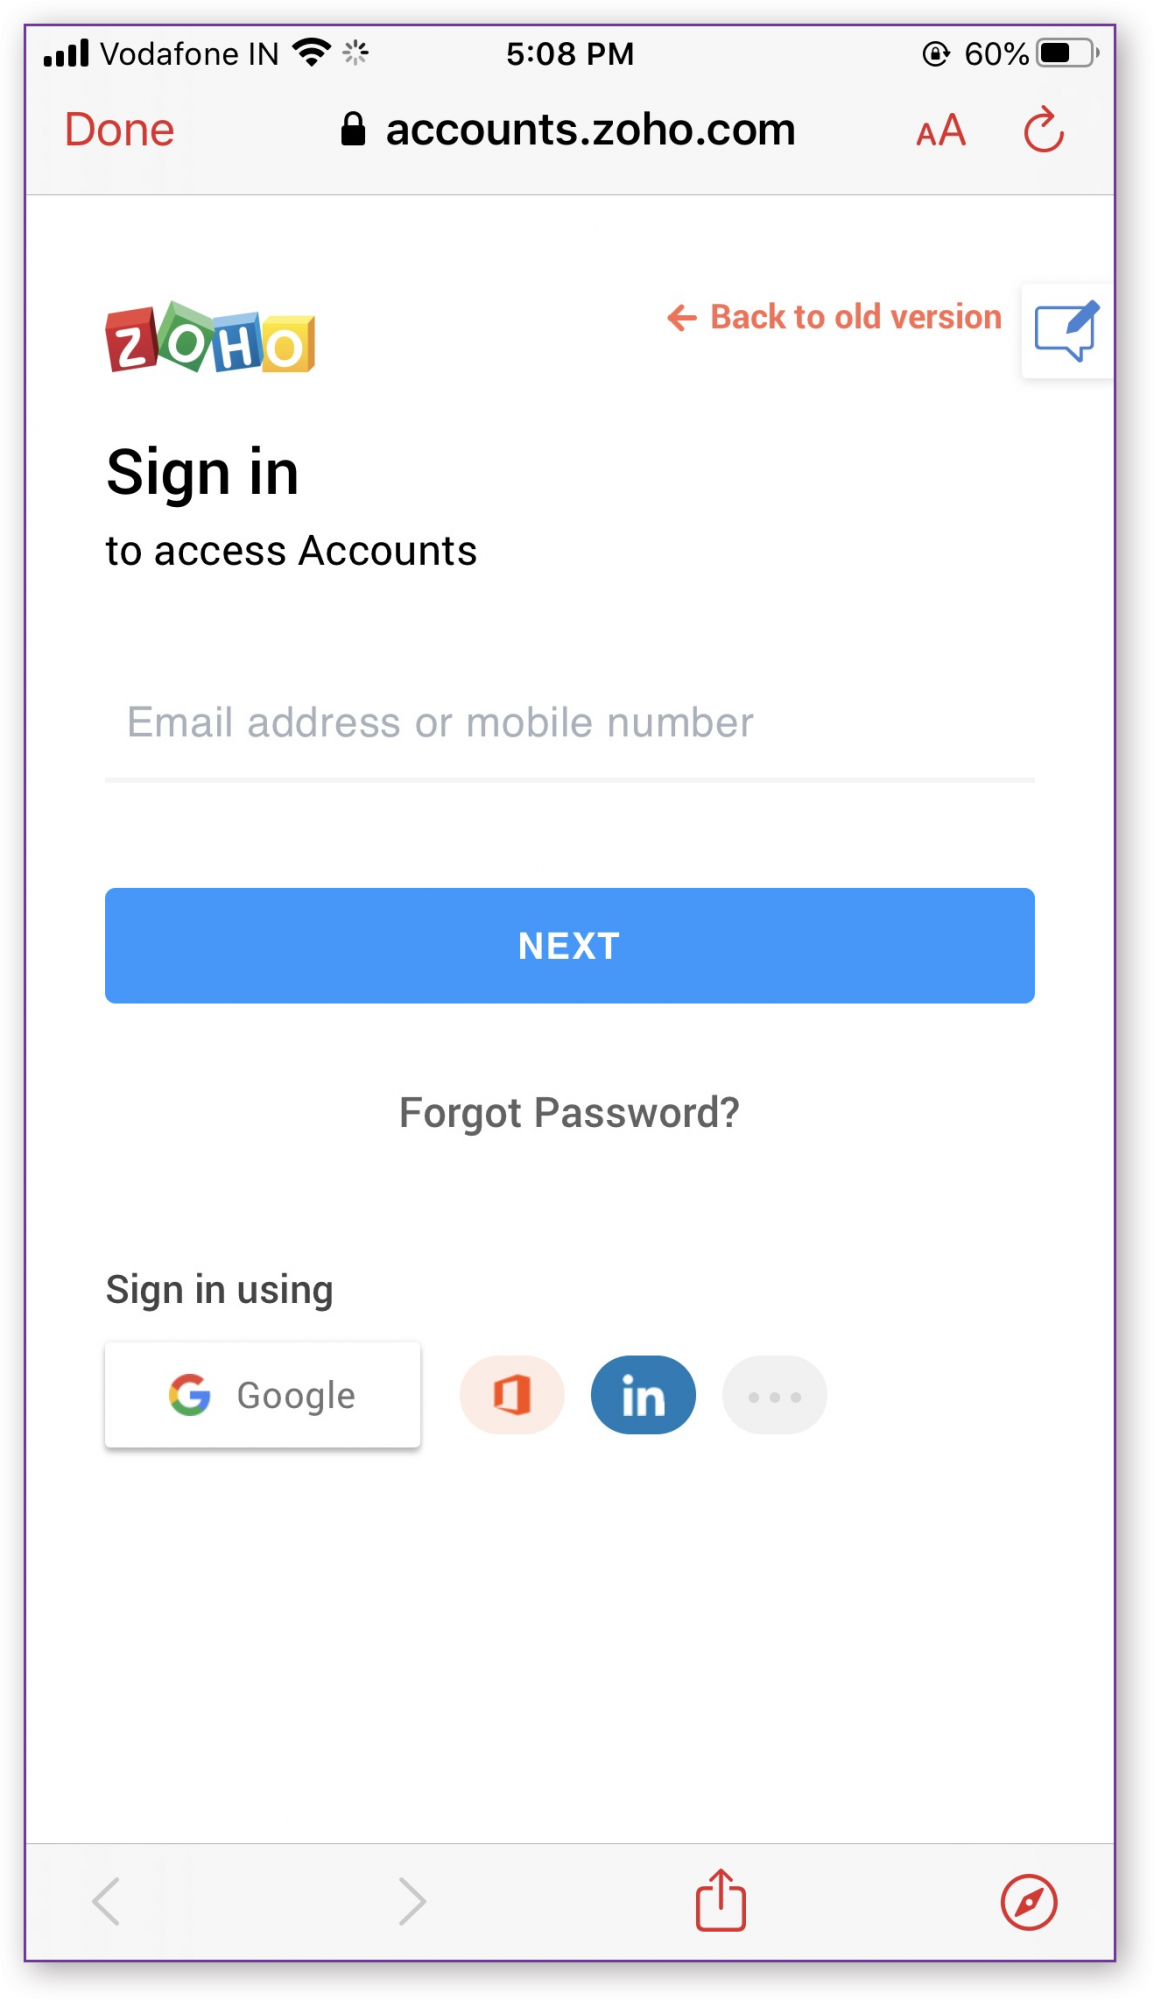 cannot send email from quickbooks wrong password